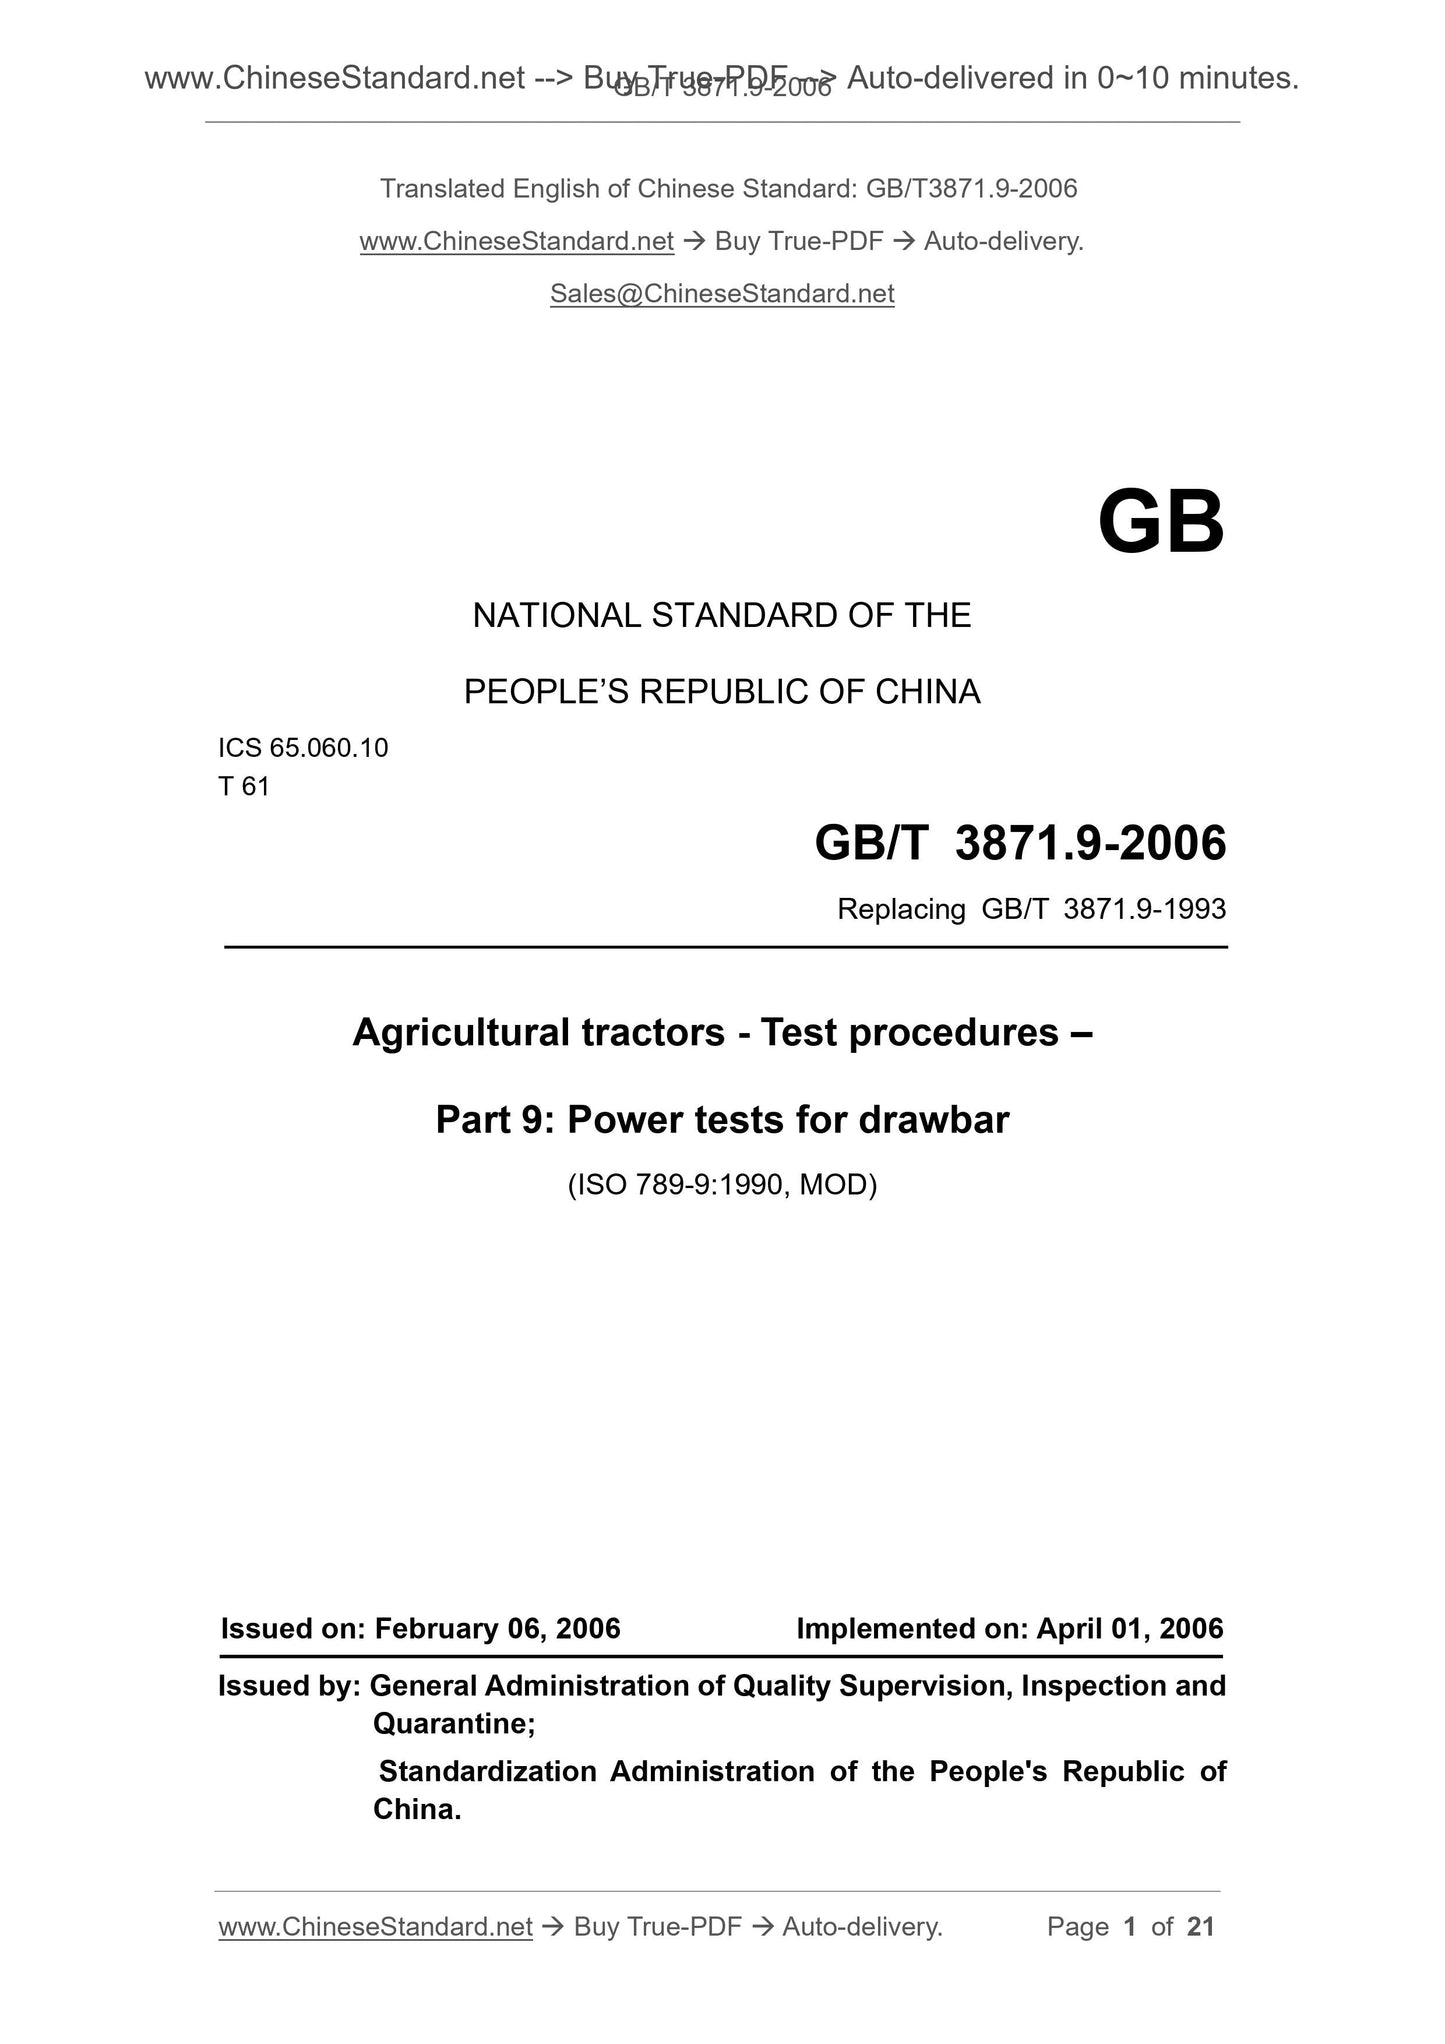 GB/T 3871.9-2006 Page 1